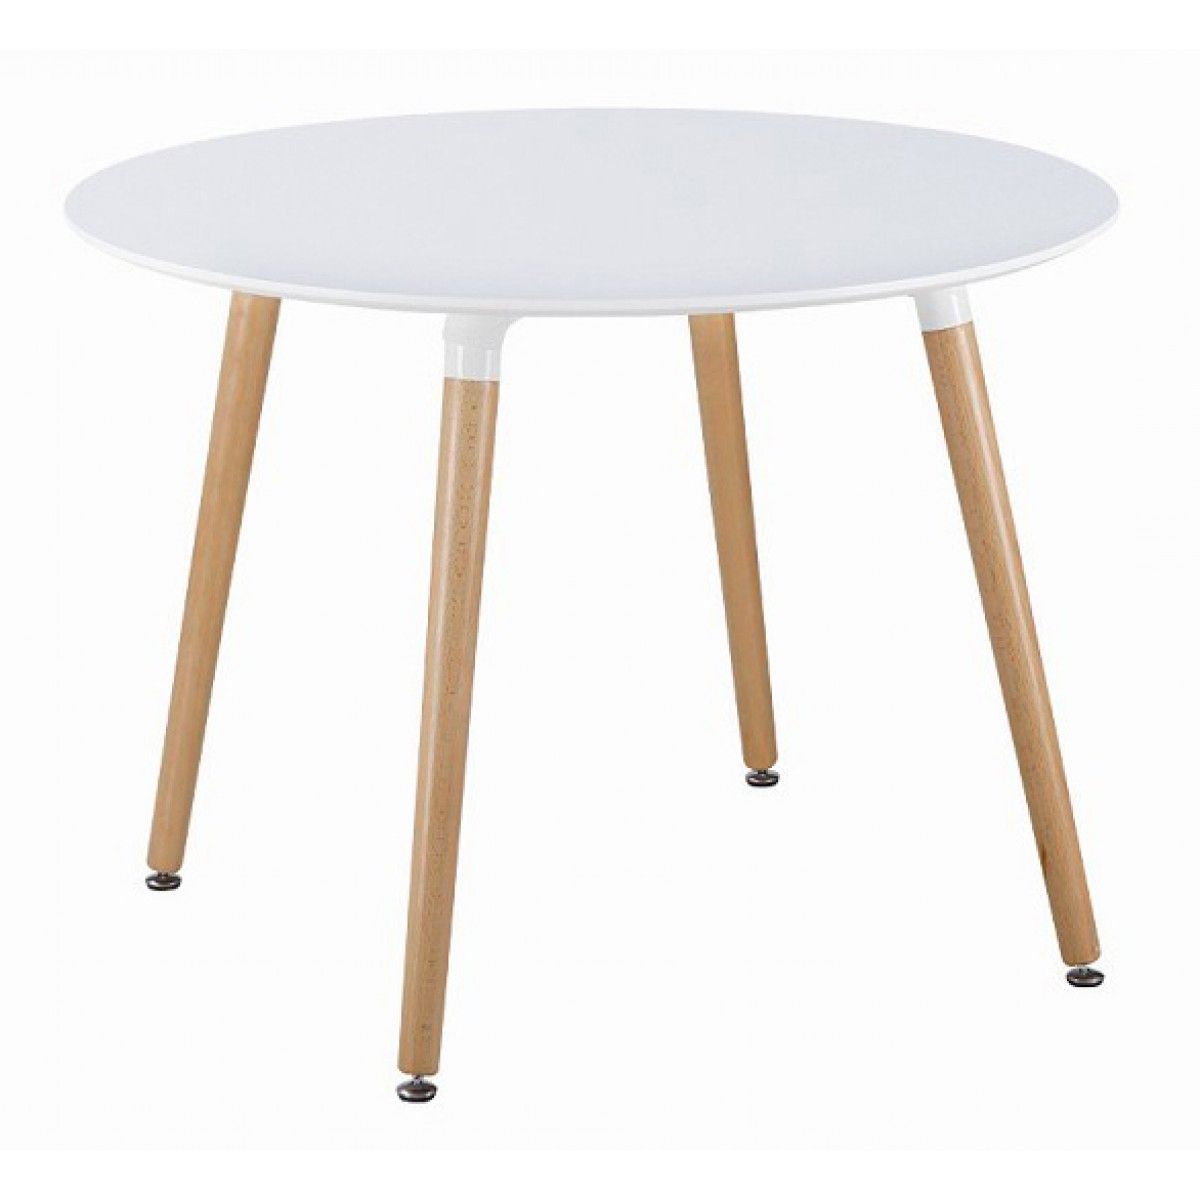 Most Recently Released Incredible Eame Style Dining Table D W White Round Chair And In Eames Style Dining Tables With Wooden Legs (View 7 of 30)